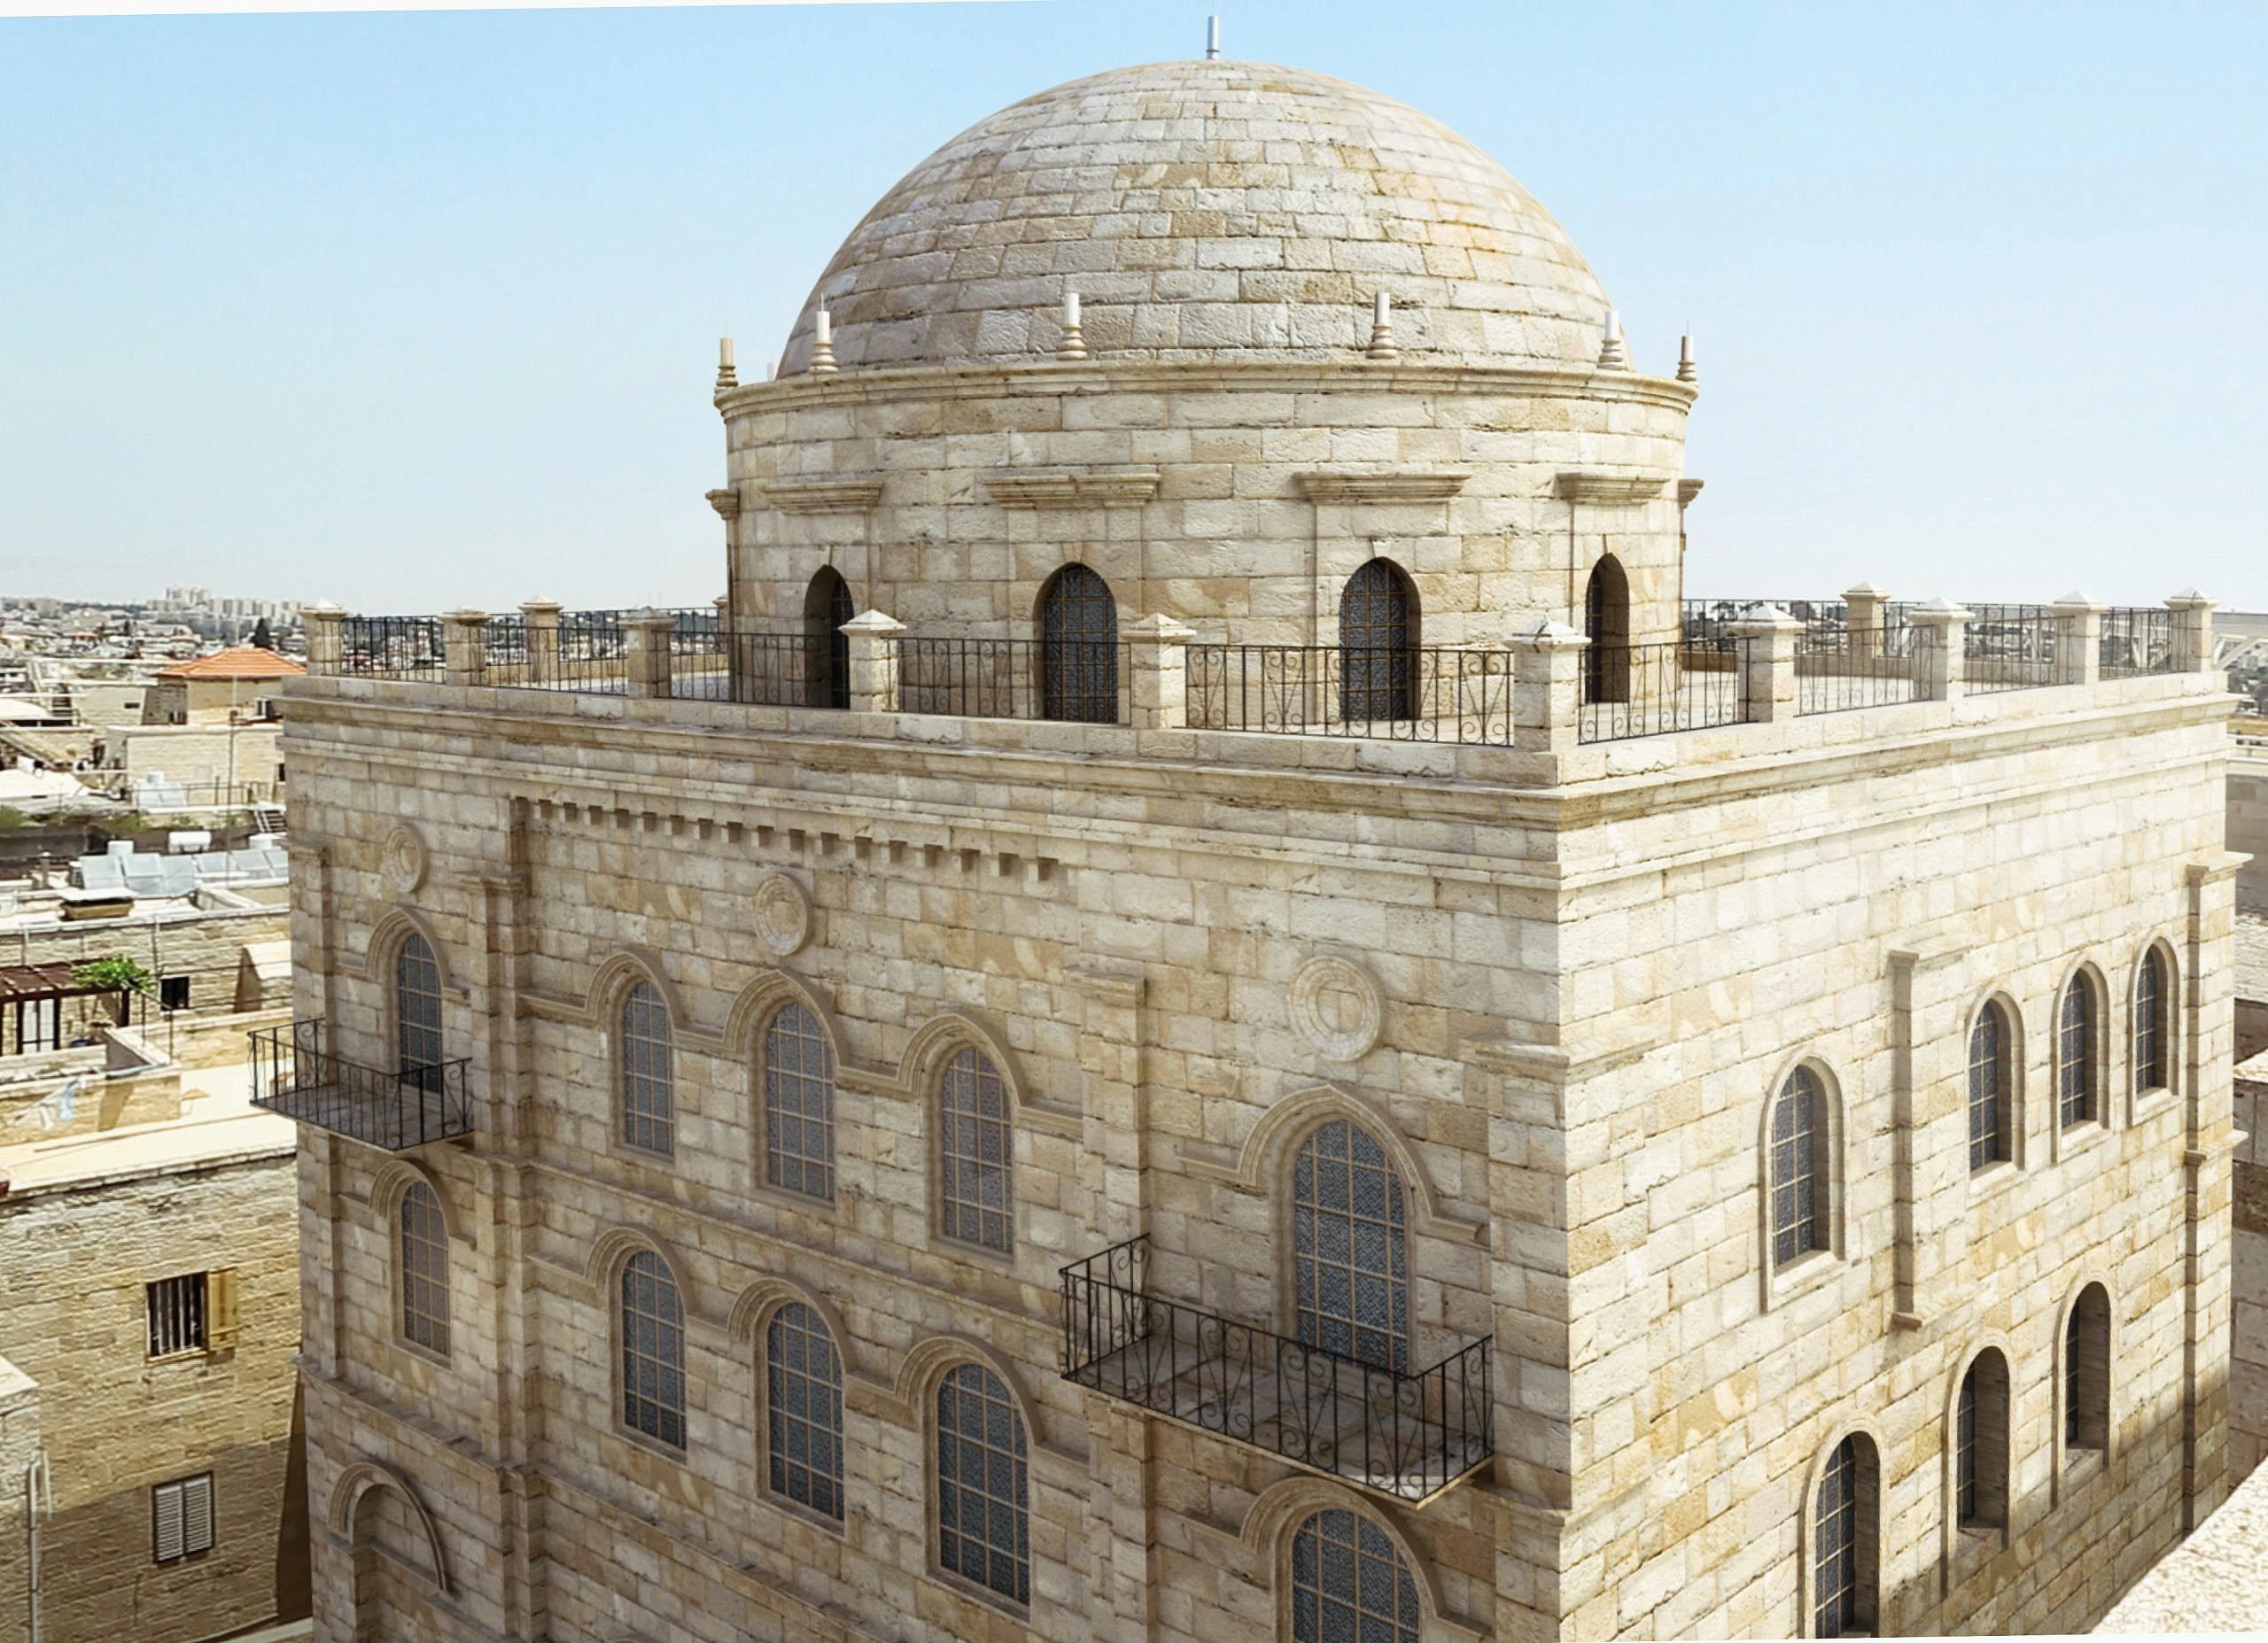 The historic Tiferet Yisrael, or “Glory of Israel” synagogue, was established in 1872 and destroyed in 1948. It has been undergoing reconstruction and is slated to be open to the public in 2024. Credit: Courtesy.